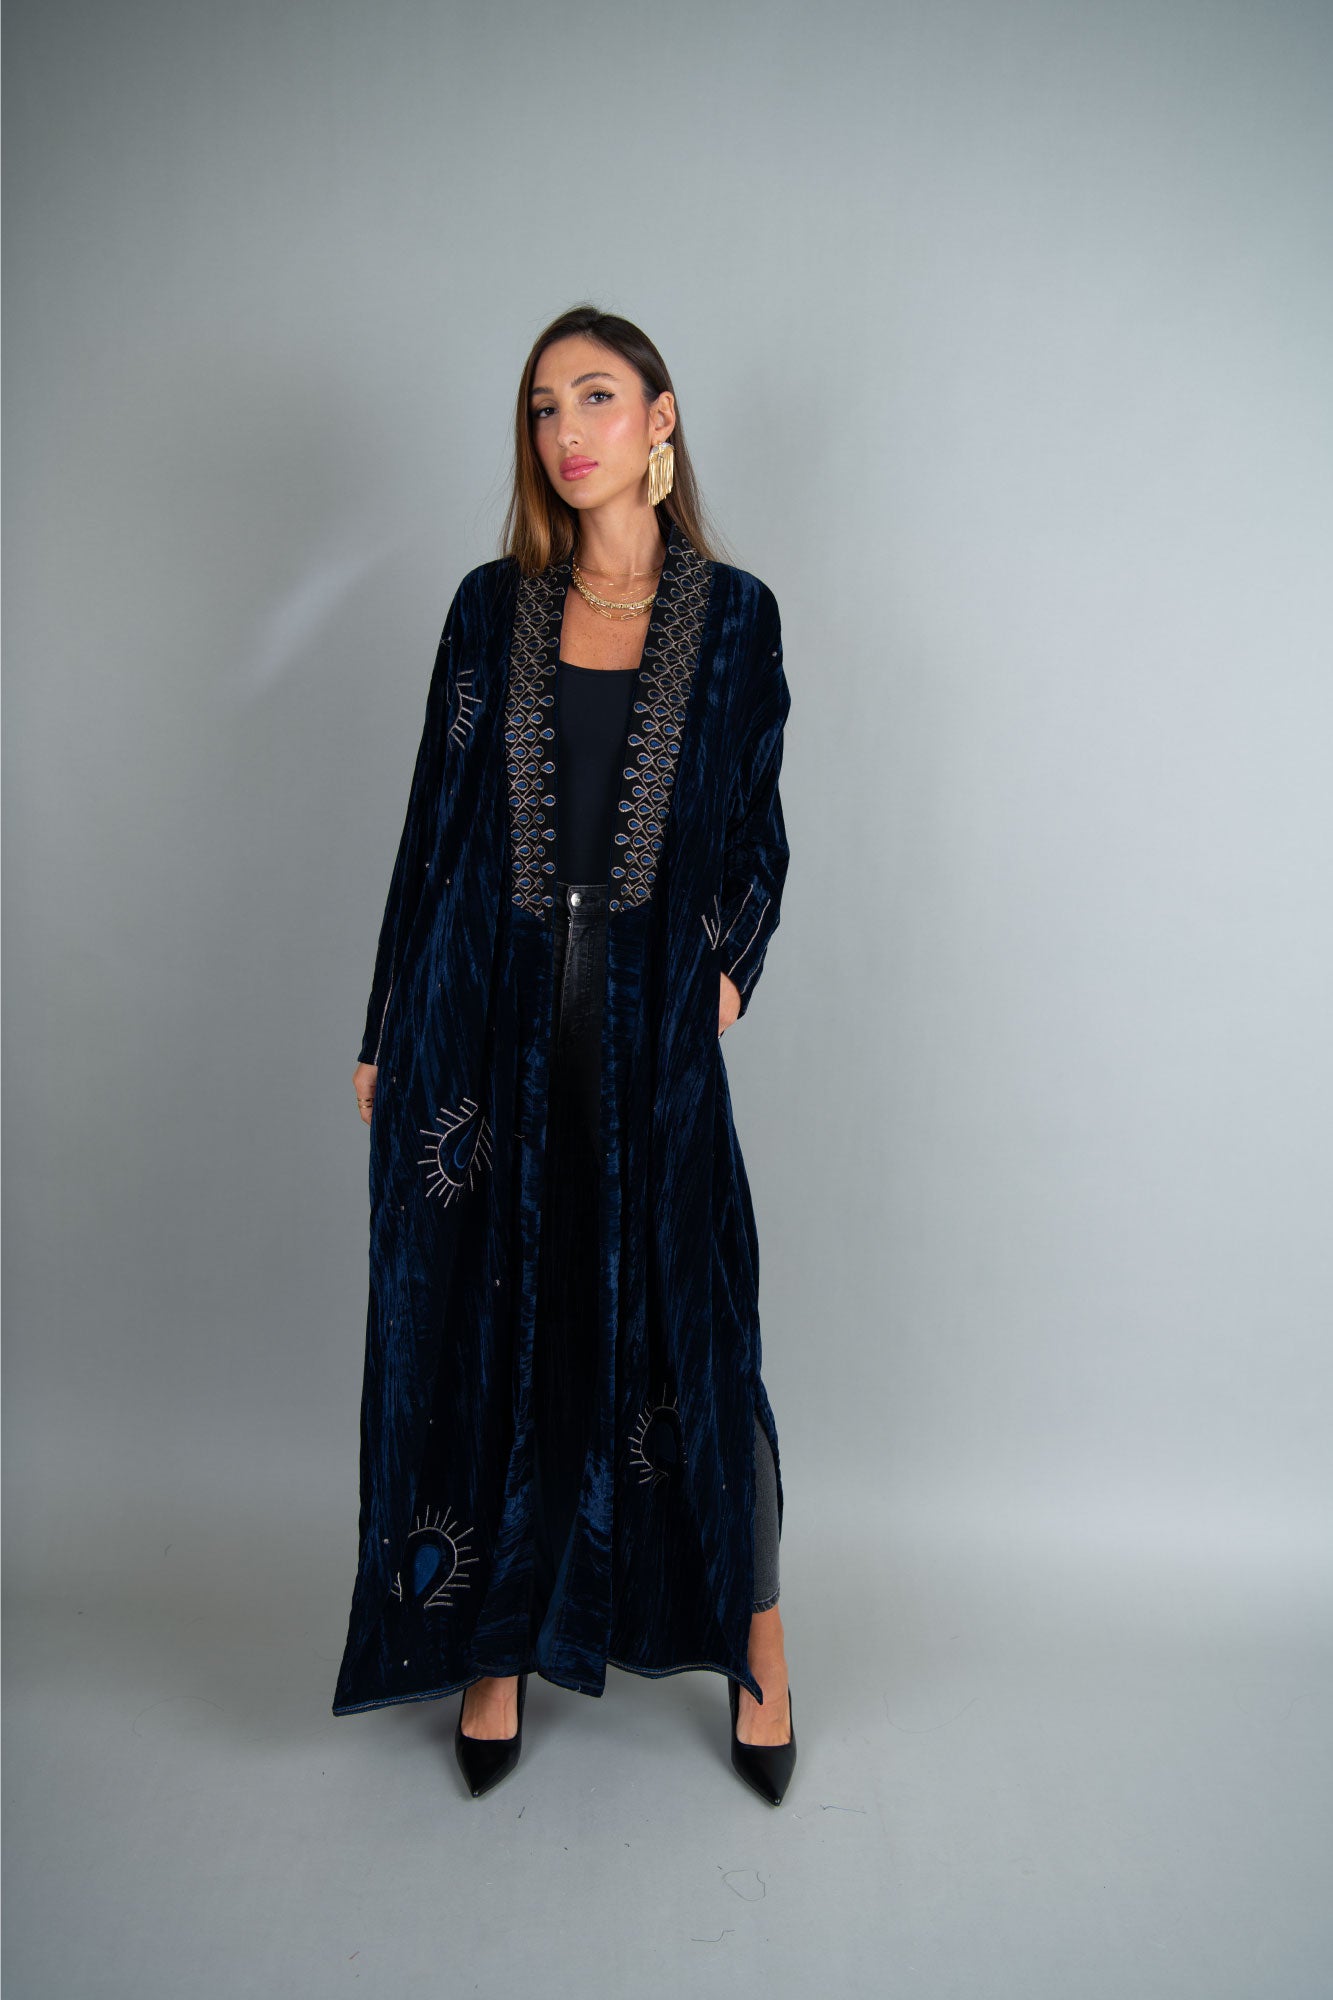 Luxurious Navy Blue Velvet Abaya with Intricate Embroidery